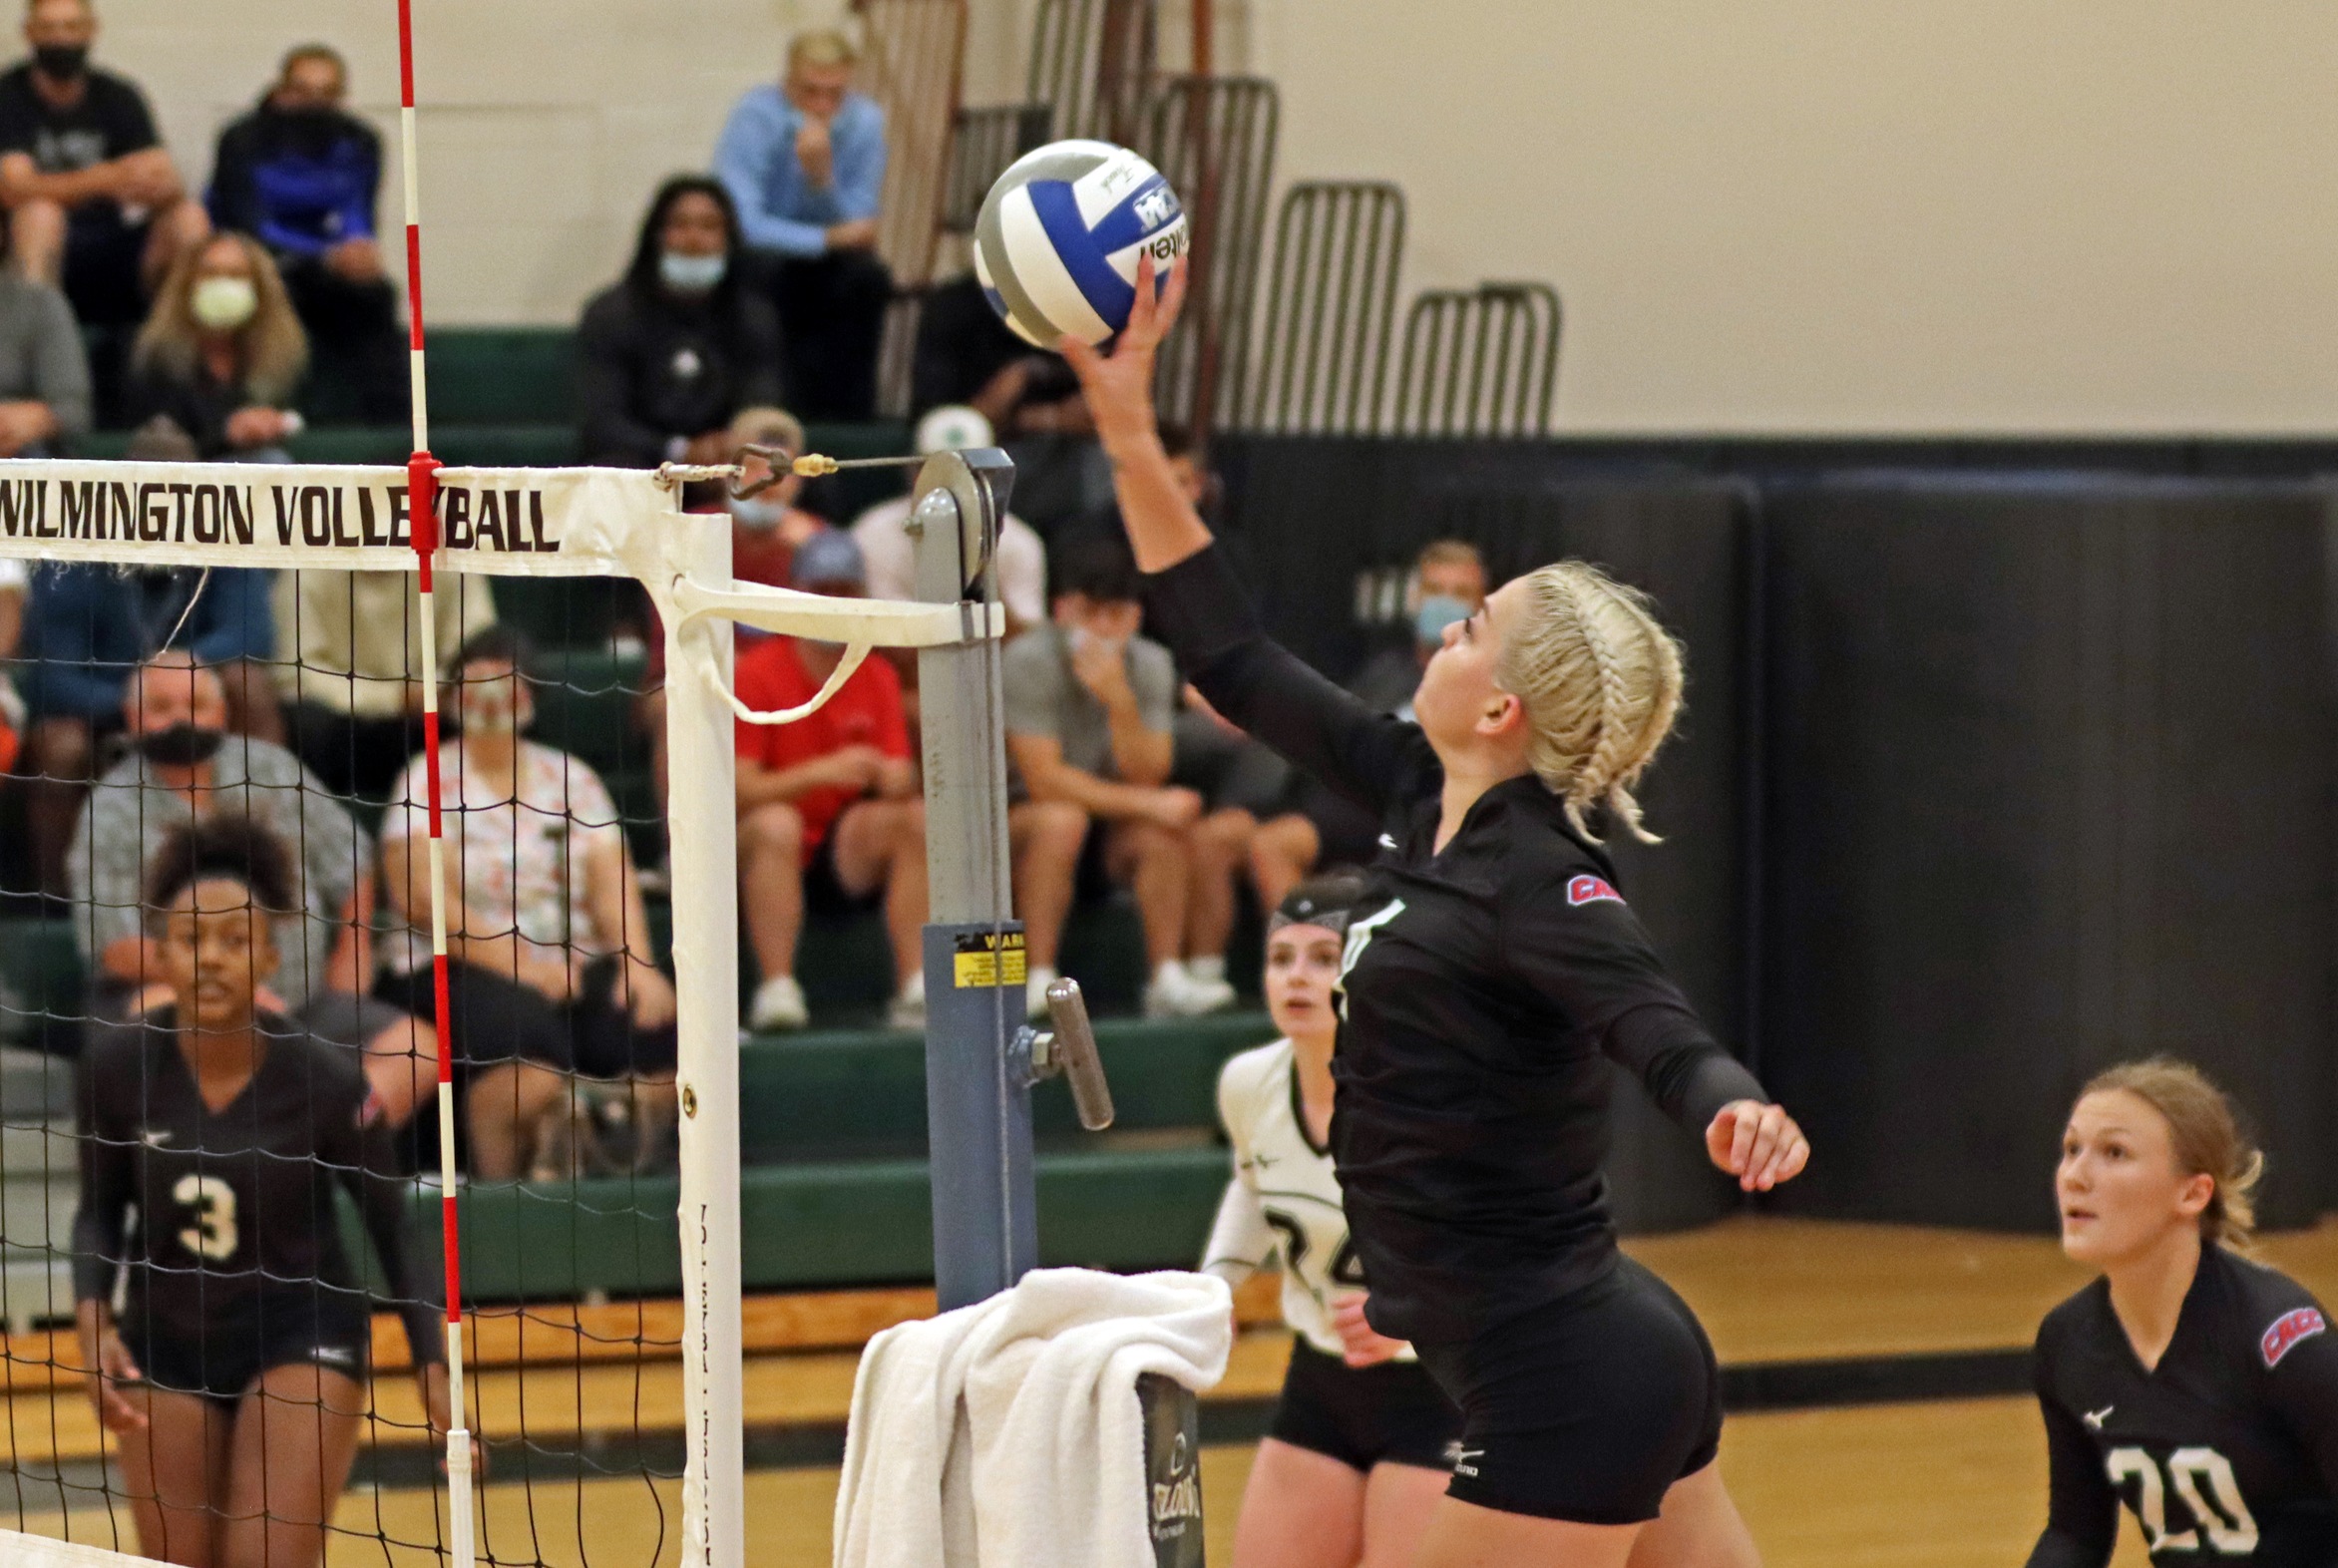 File photo of Mandy Behiels who hit .611 with 12 kills at Bloomfield. Copyright 2021; Wilmington University. All rights reserved. Photo by Trudy Spence. September 23, 2021 vs. West Chester